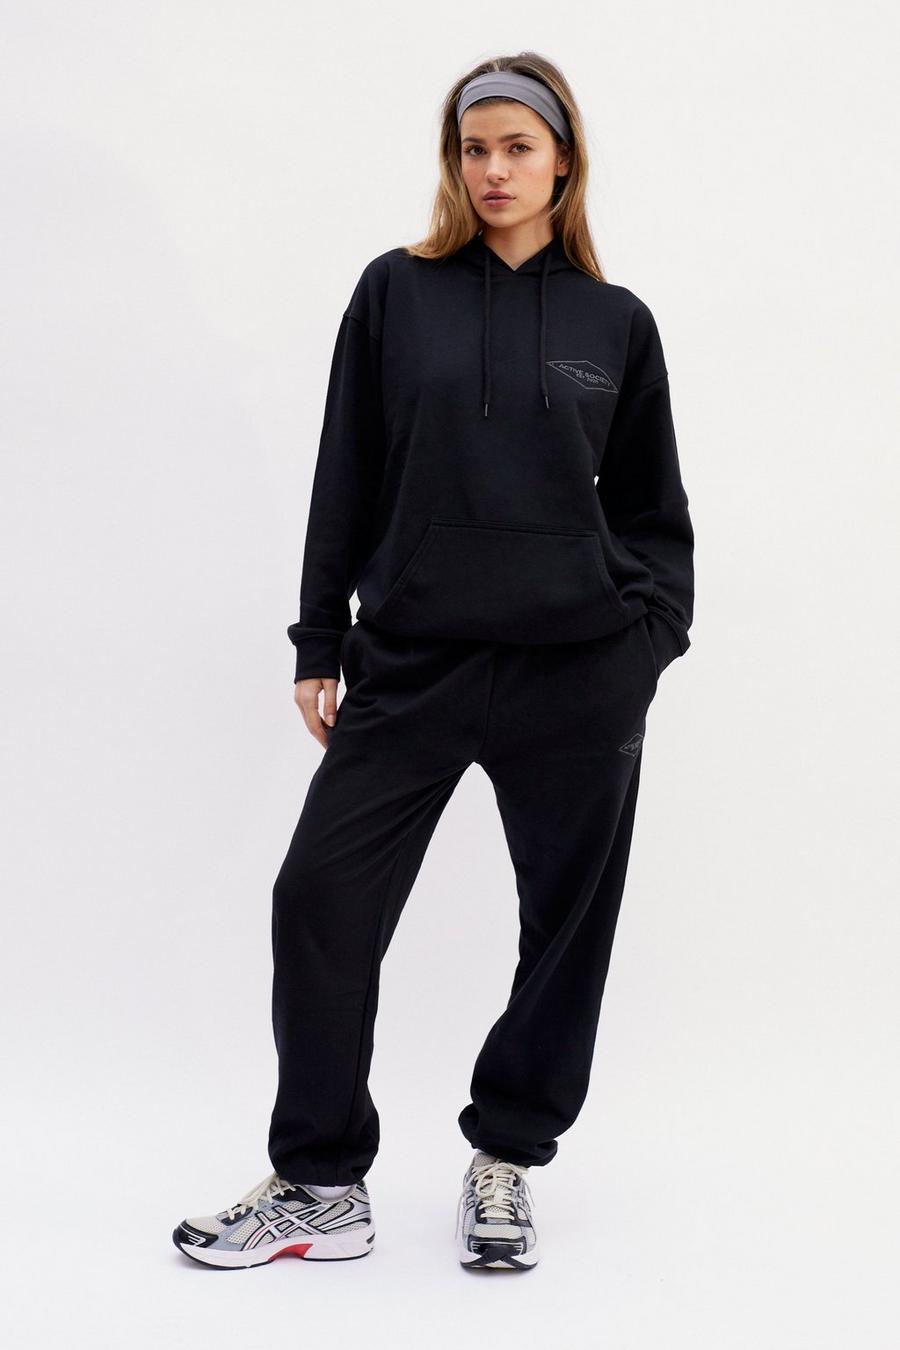 Active Society Embroidered Hoodie and Sweatpants Set